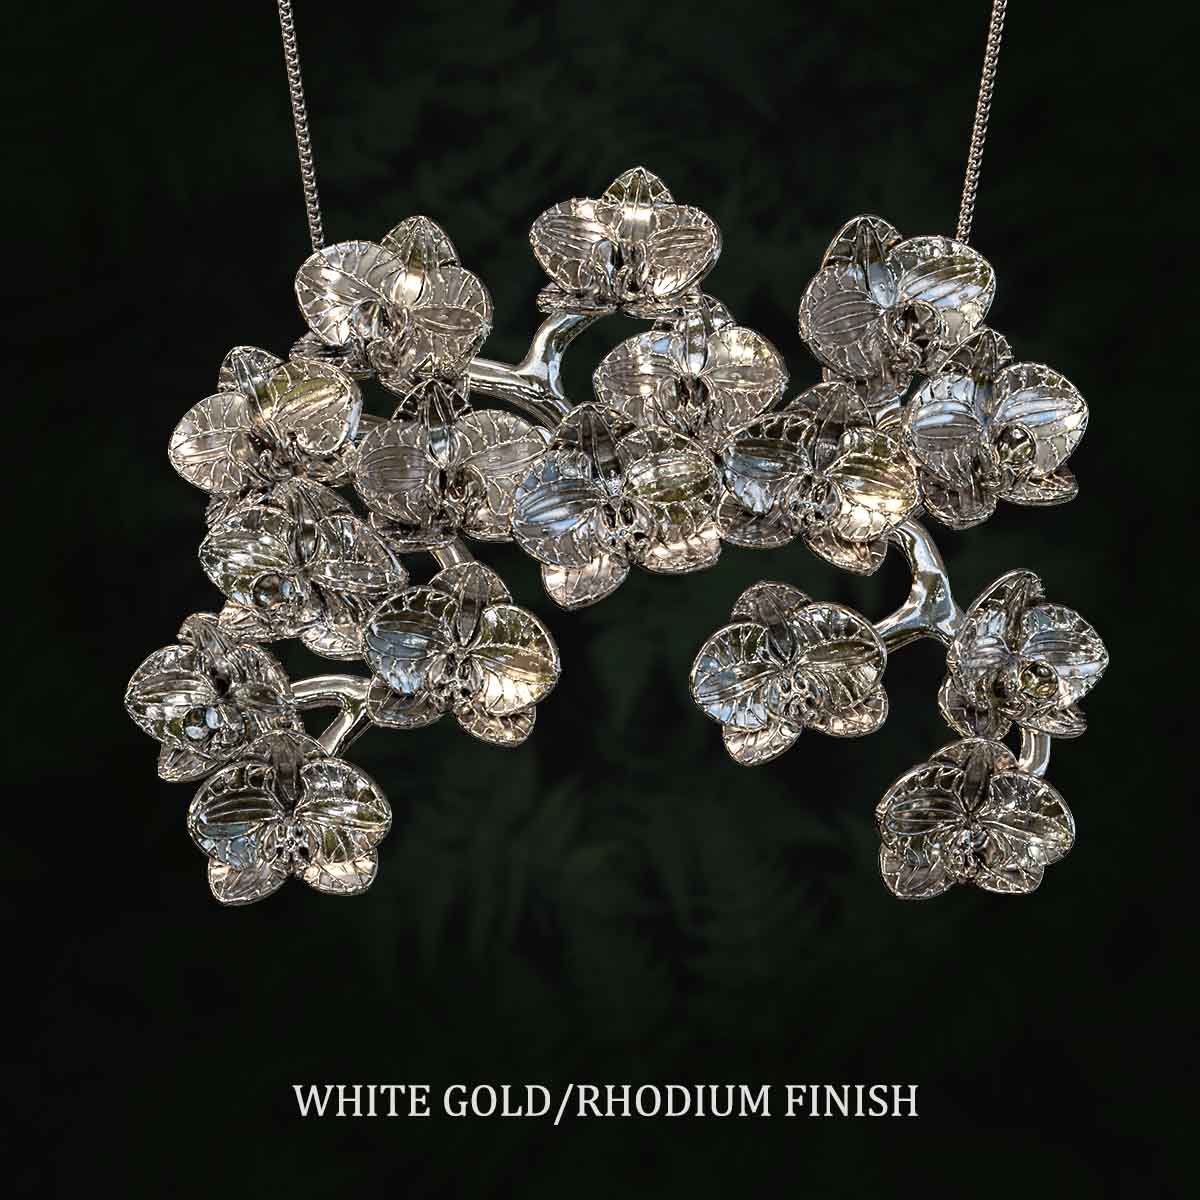 White-Gold-Rhodium-Finish-Grand-Orchid-Bough-Pendant-Jewelry-For-Necklace